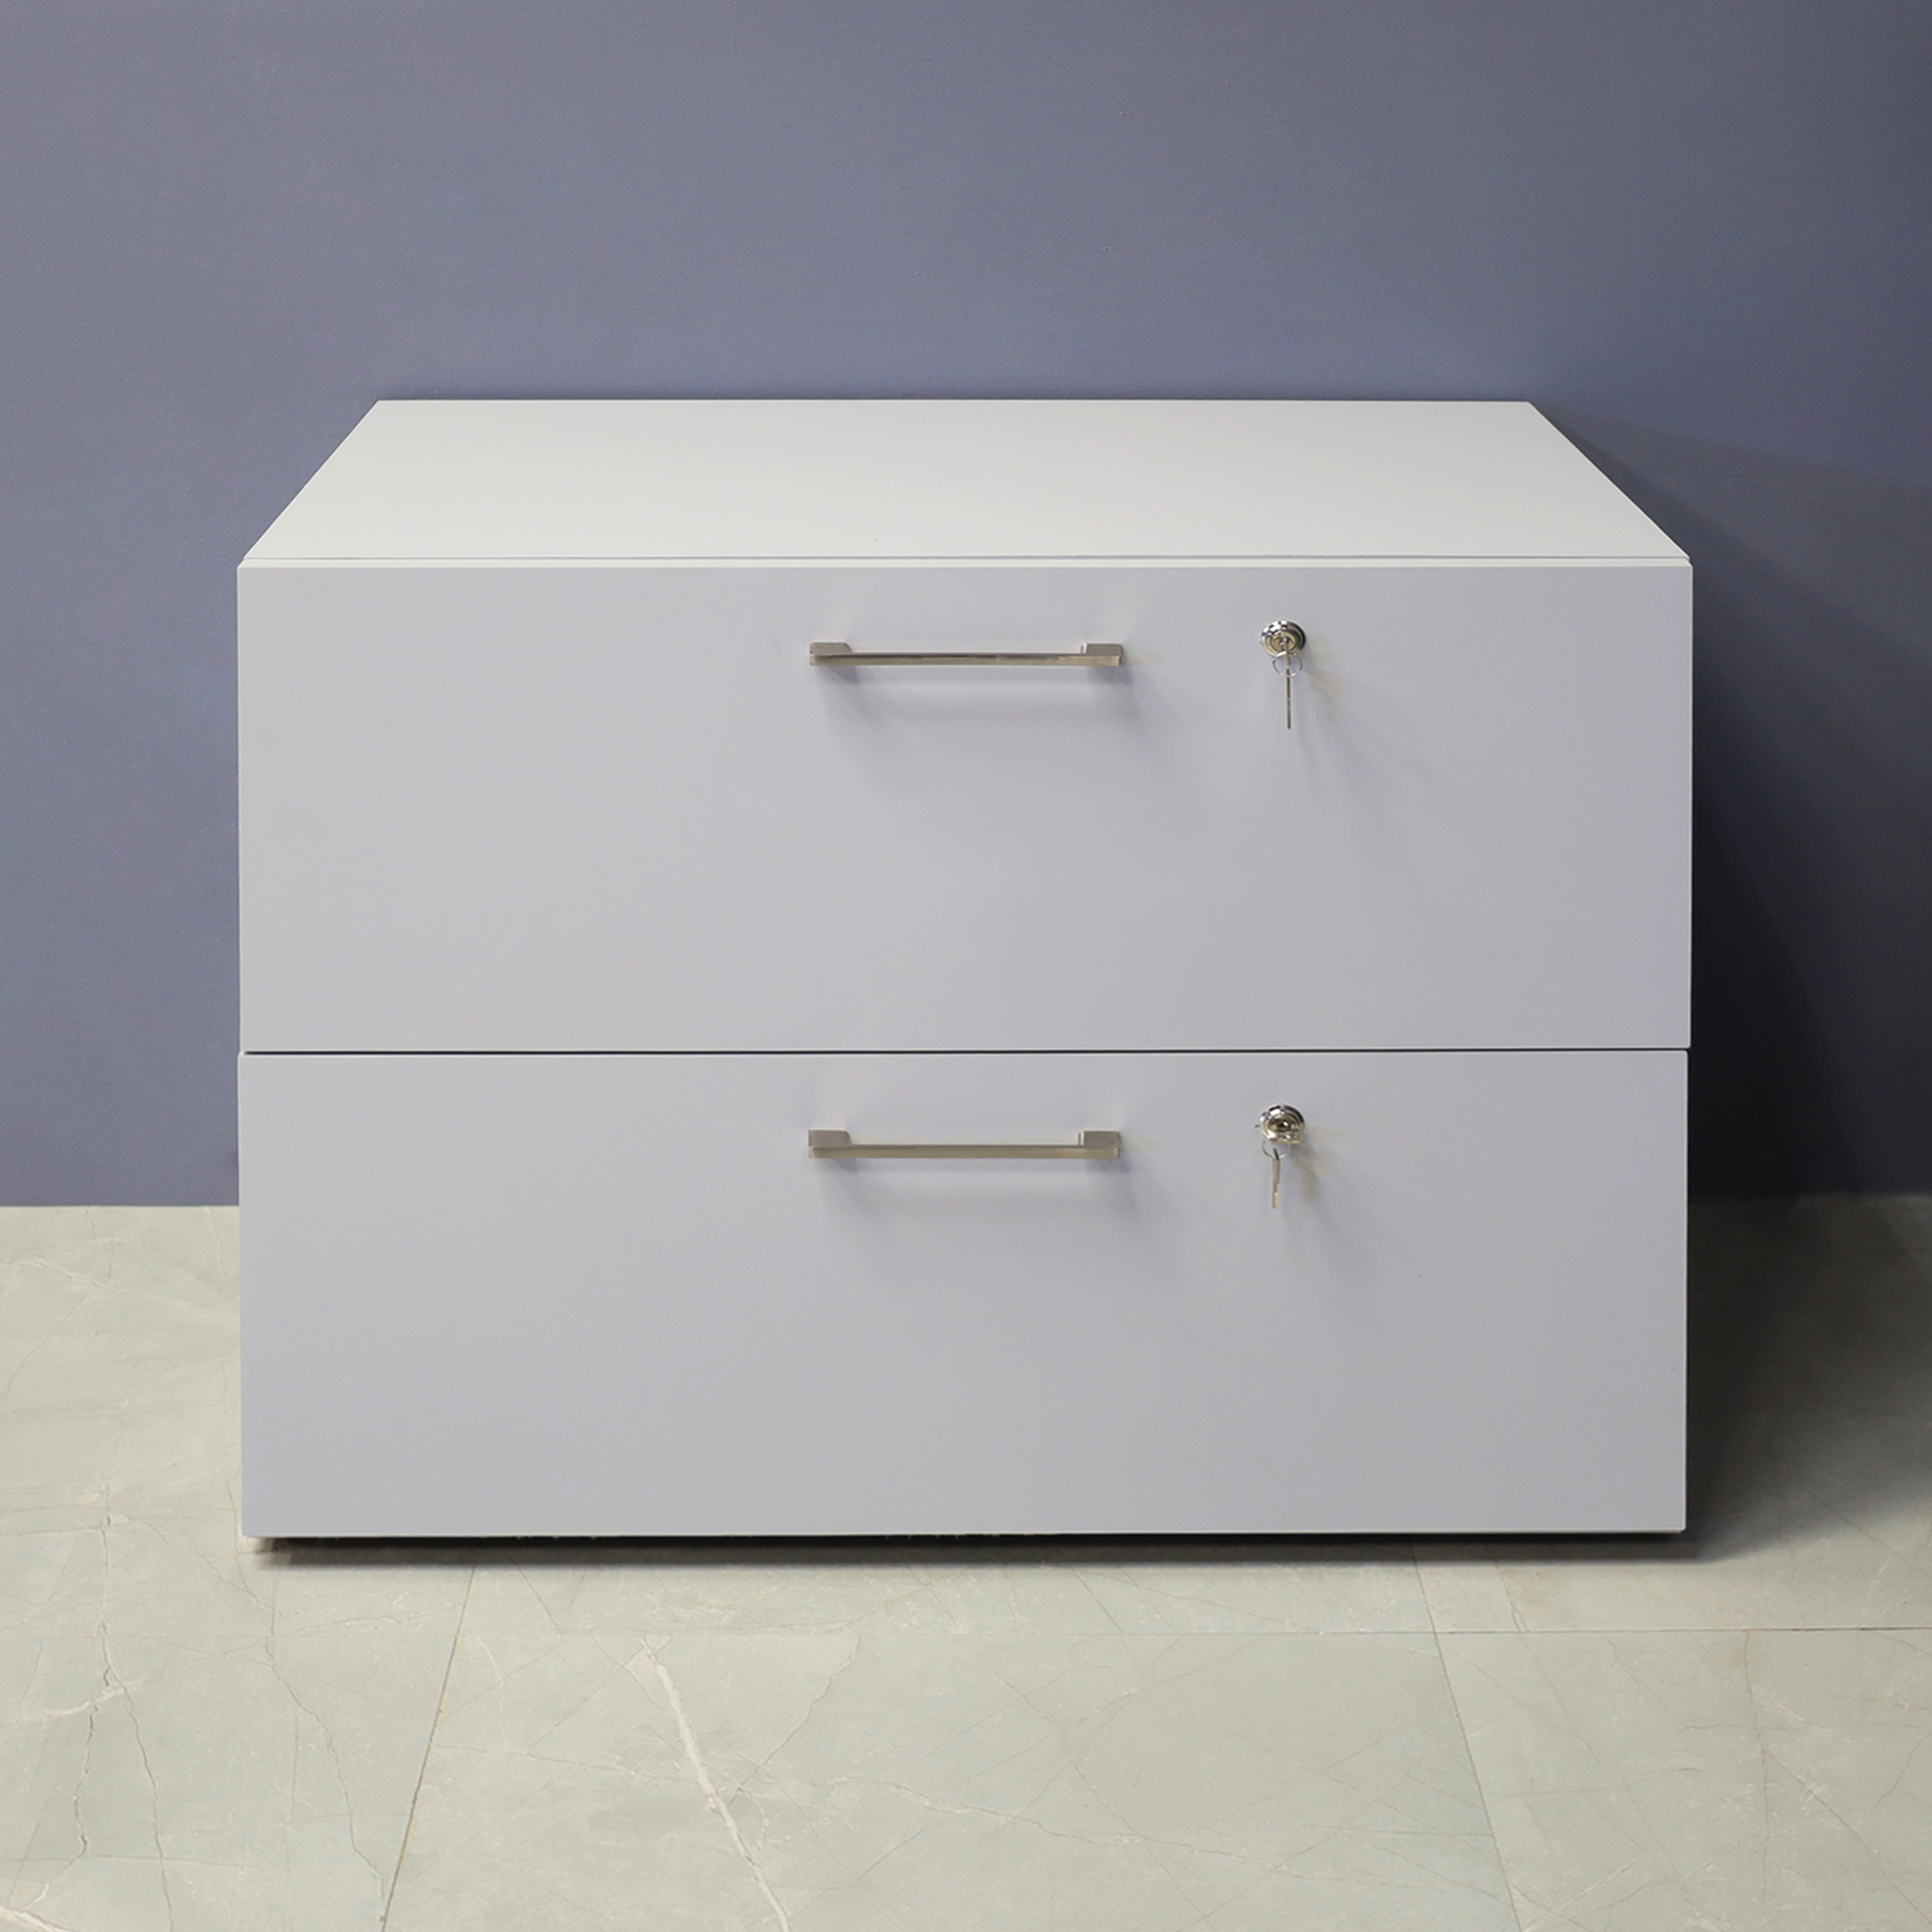 Naples Lateral File Cabinet in folkstone gray matte laminate, shown here.